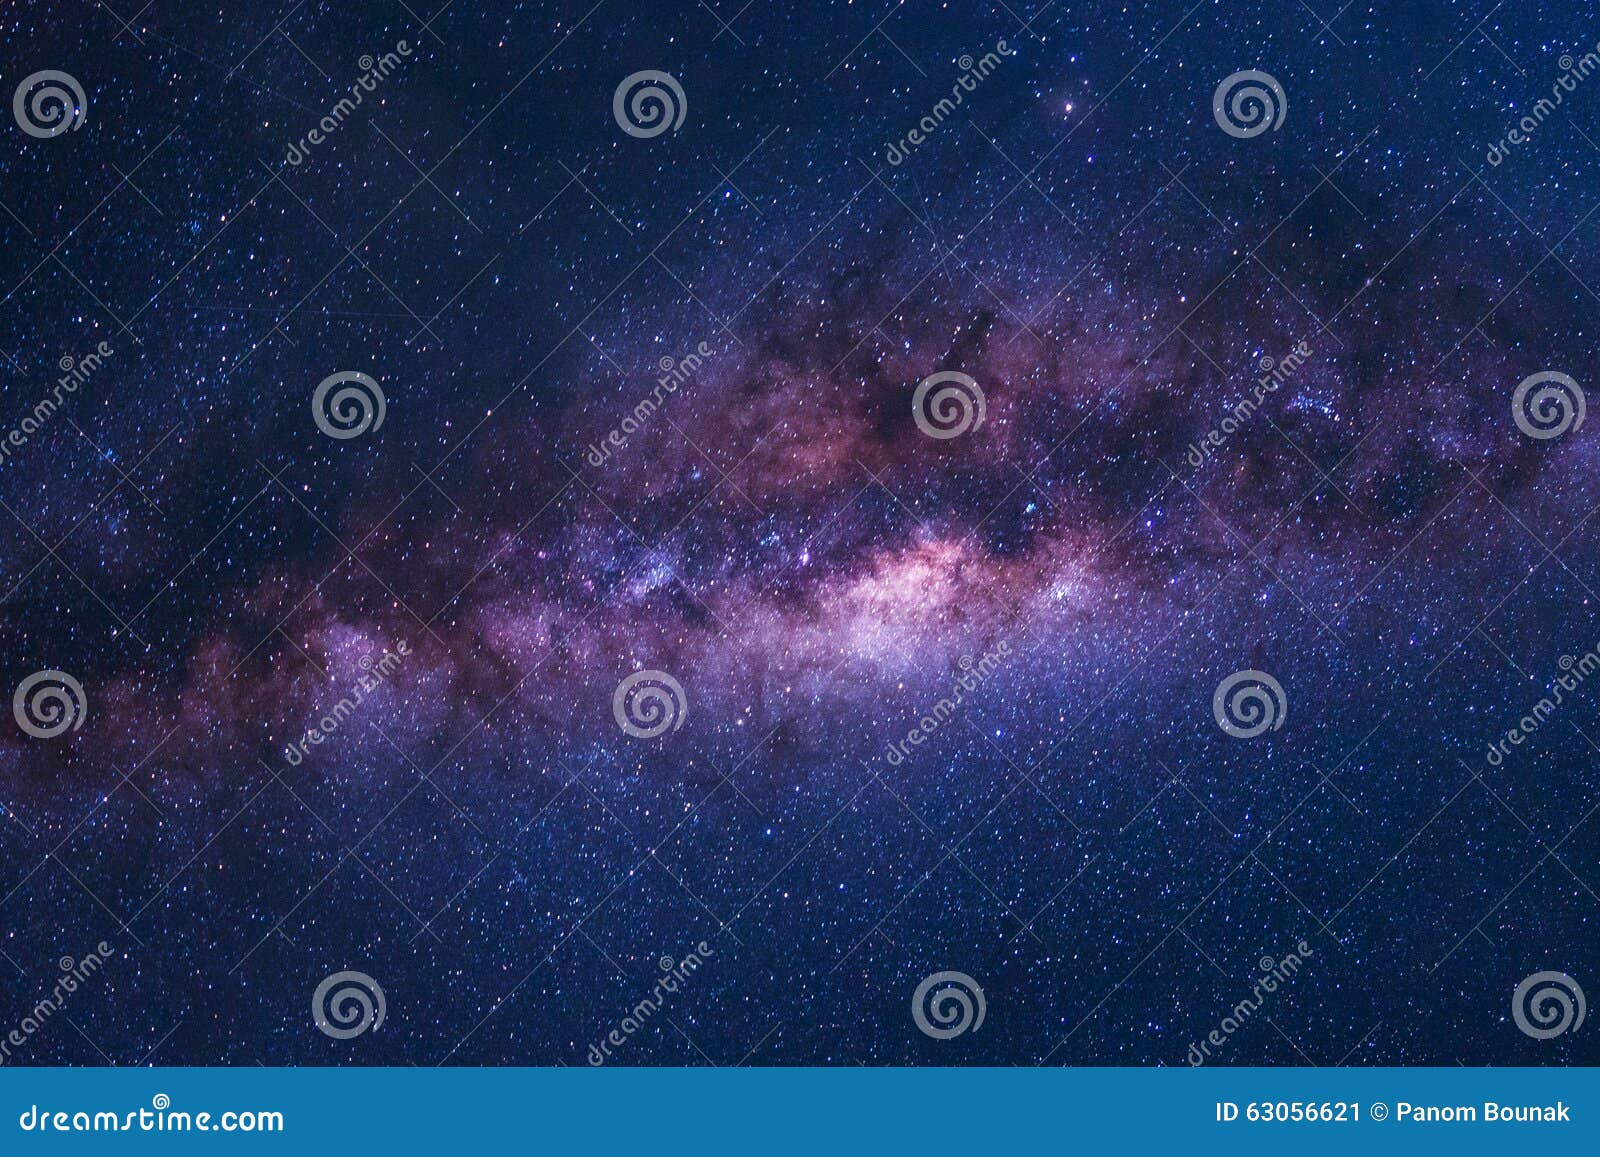 colorful space shot of milky way galaxy with stars on a night sky